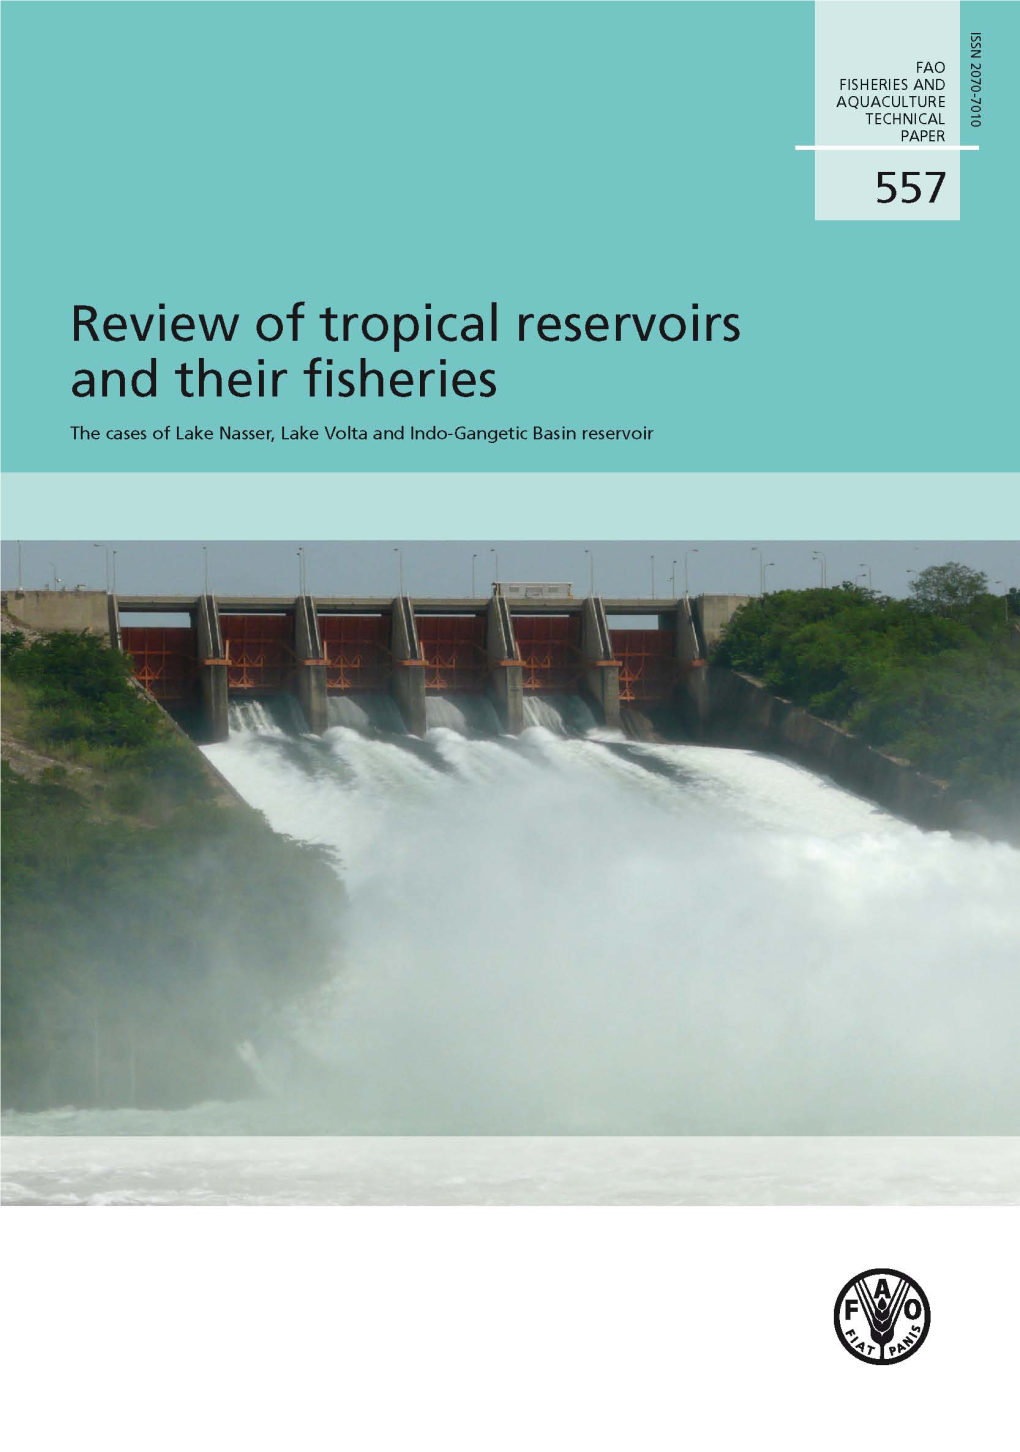 Review of Tropical Reservoirs and Their Fisheries – the Cases of Lake Nasser, Lake Volta and Indo-Gangetic Basin Reservoirs